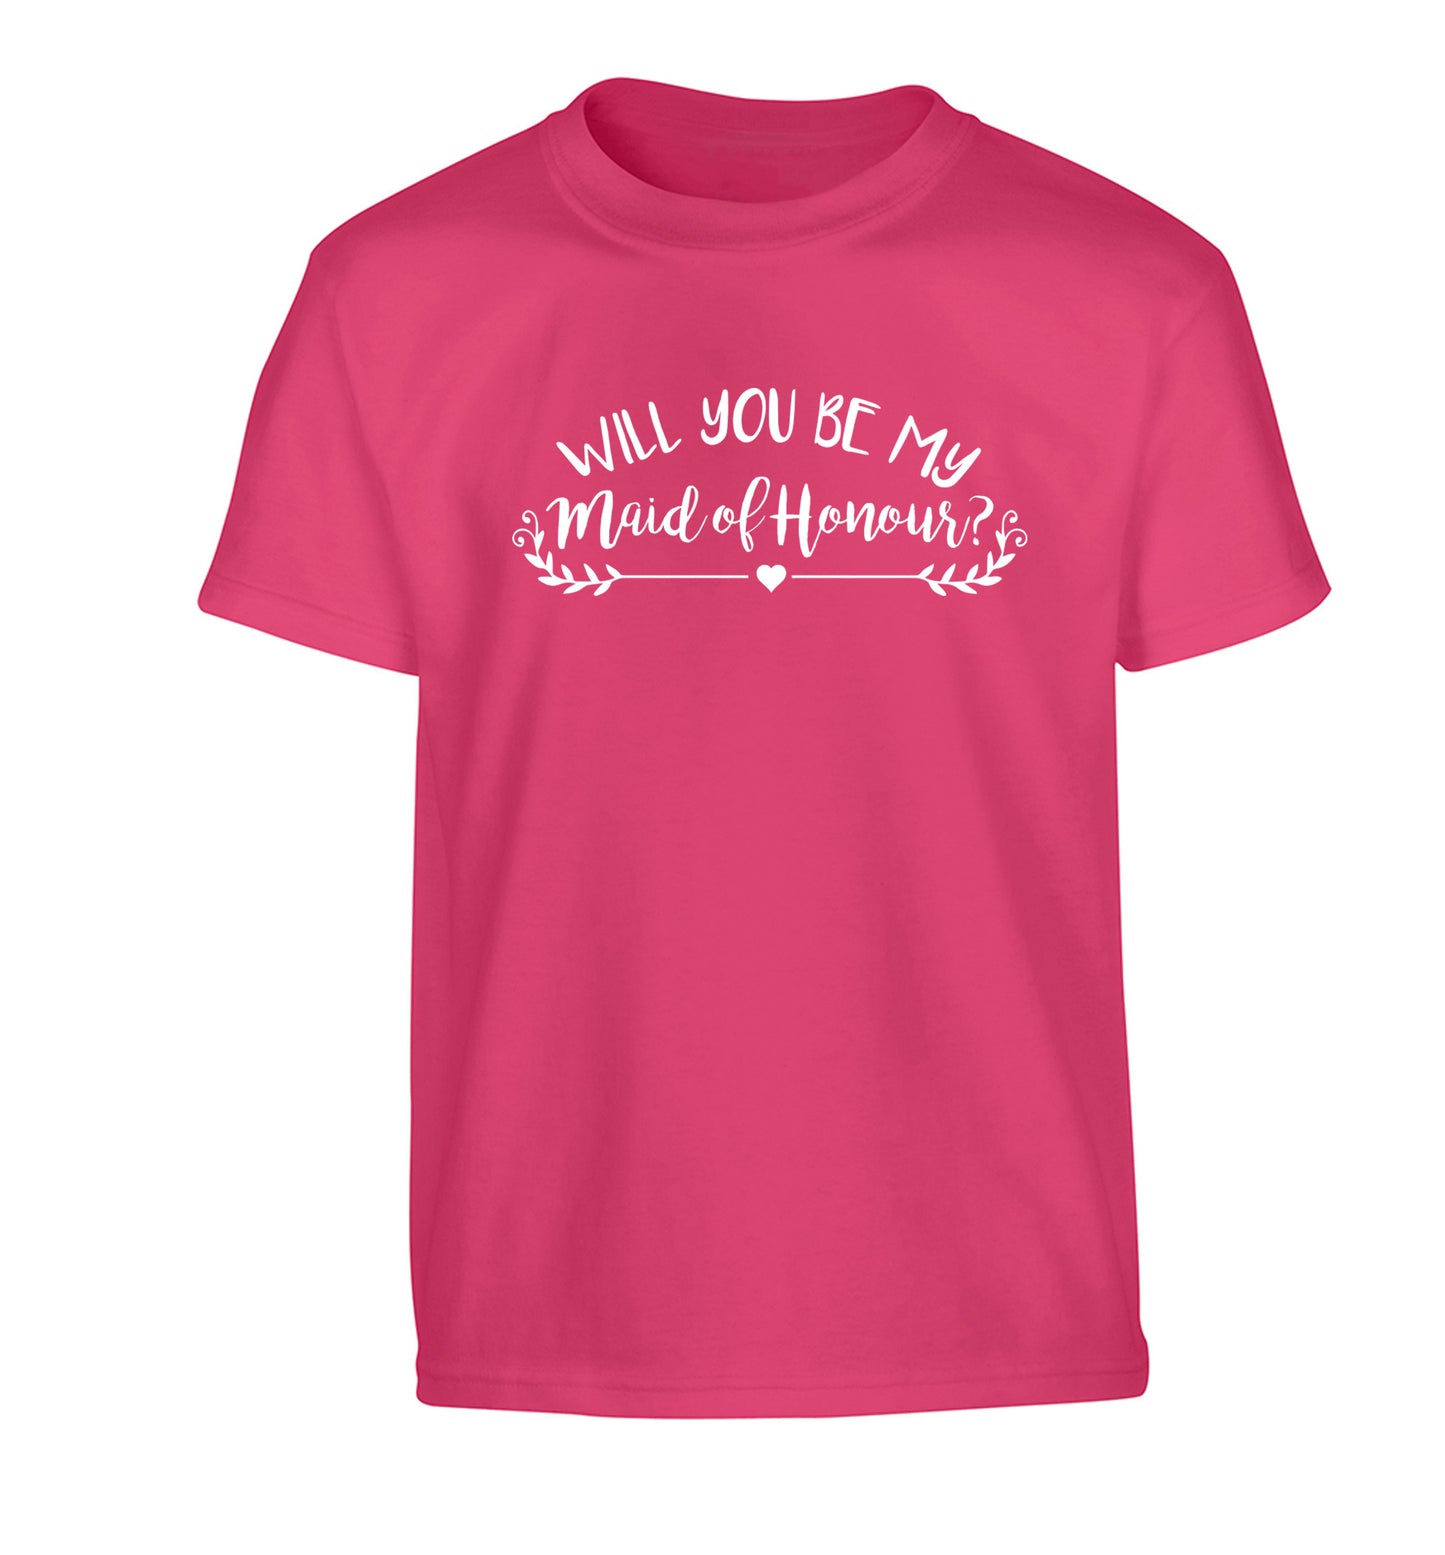 Will you be my maid of honour? Children's pink Tshirt 12-14 Years